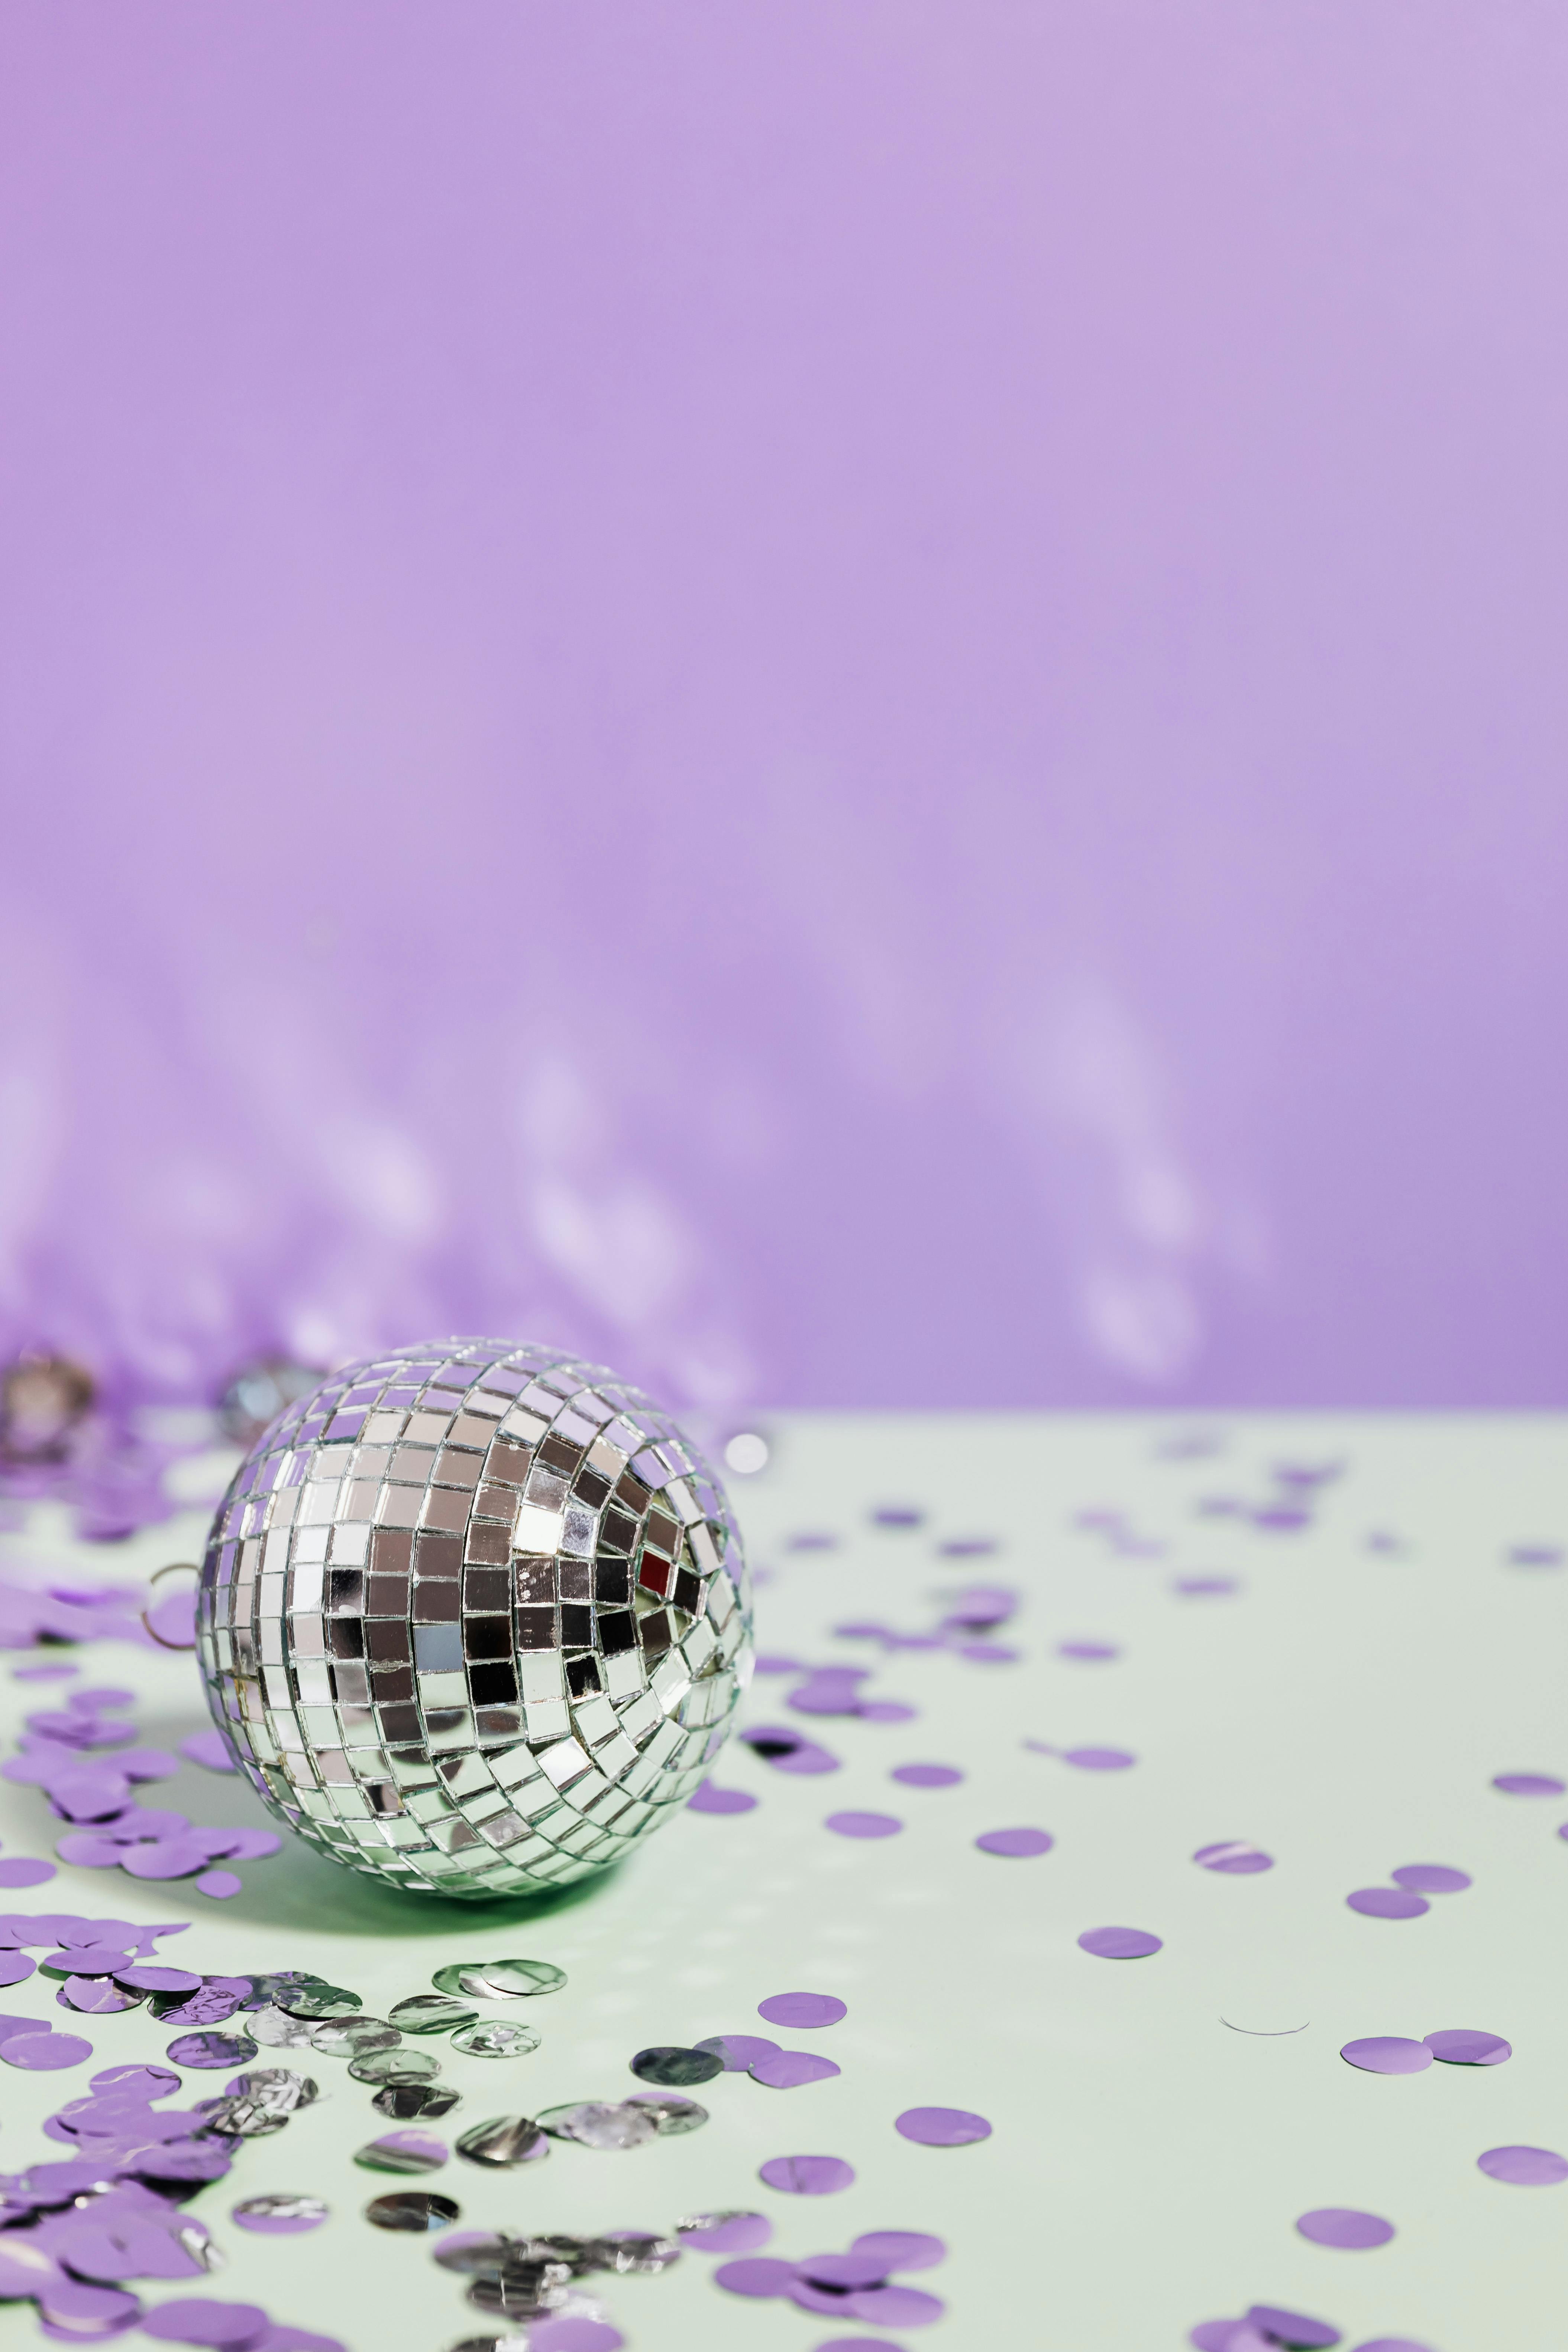 Disco Ball Photos Download The BEST Free Disco Ball Stock Photos  HD  Images